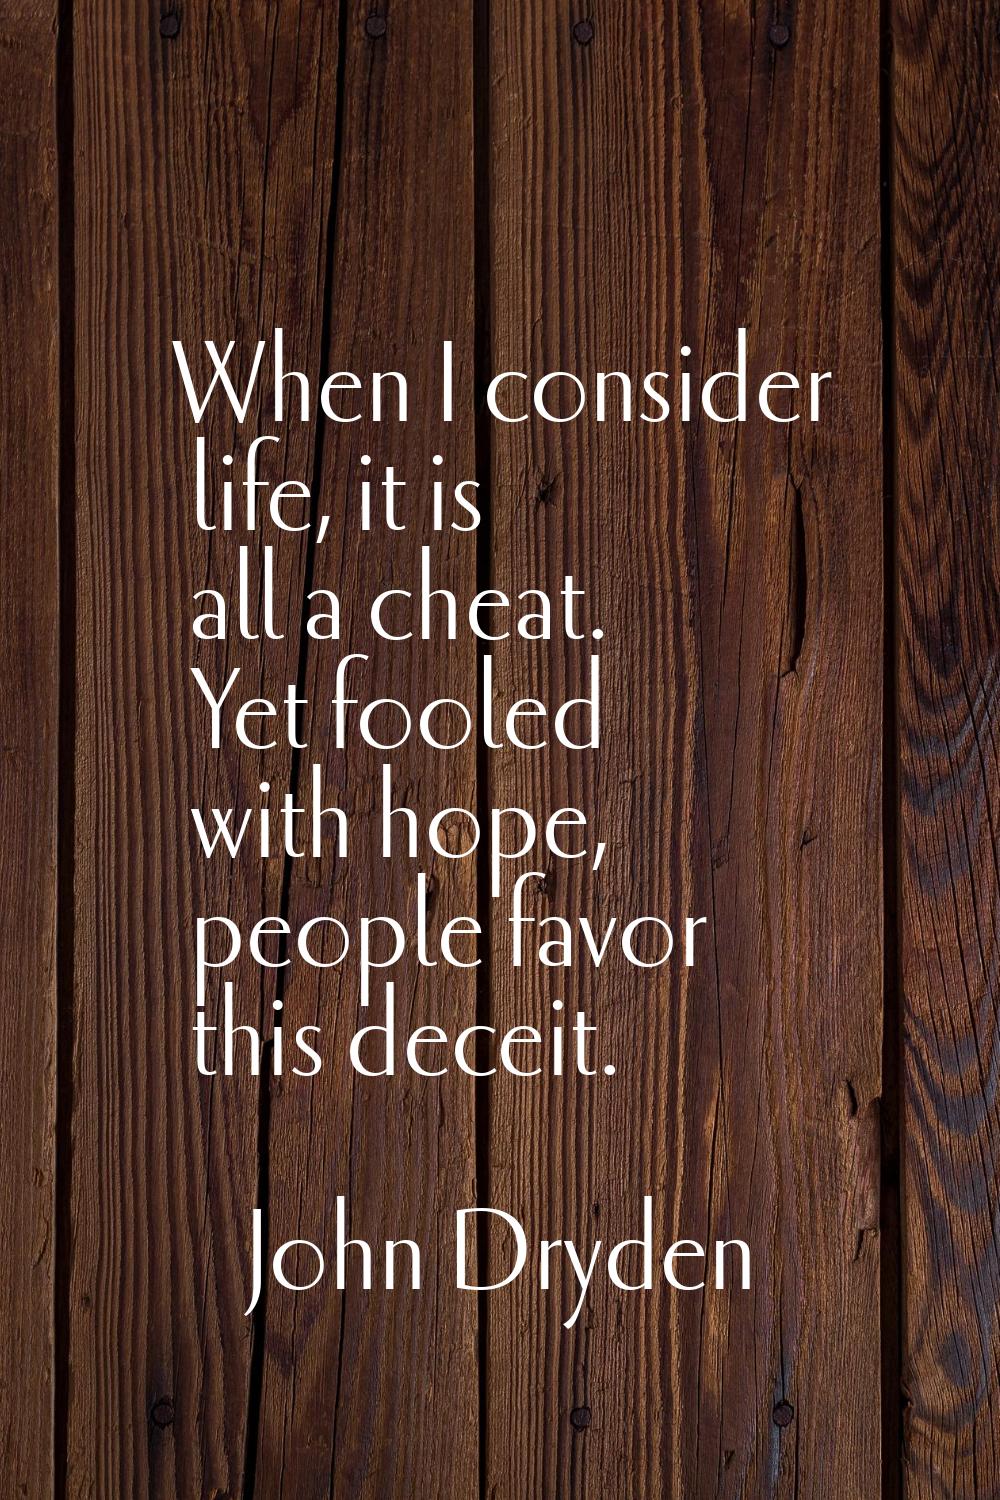 When I consider life, it is all a cheat. Yet fooled with hope, people favor this deceit.